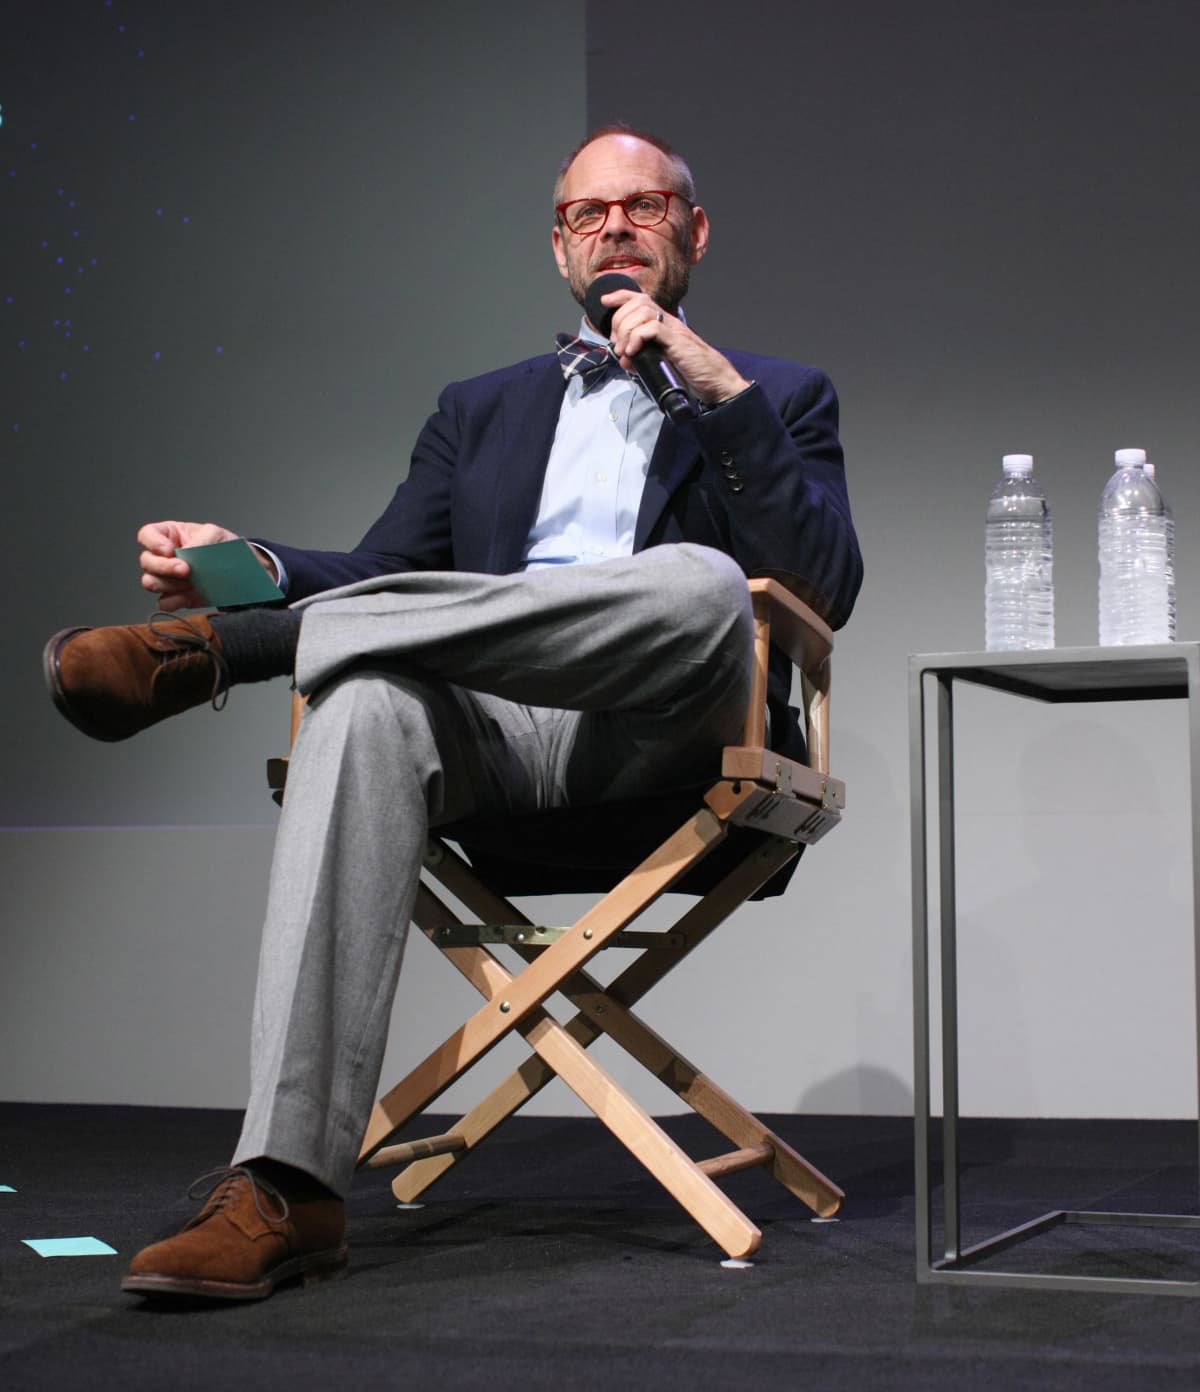 Chef Alton Brown attends Meet the Author at the Apple Store Soho